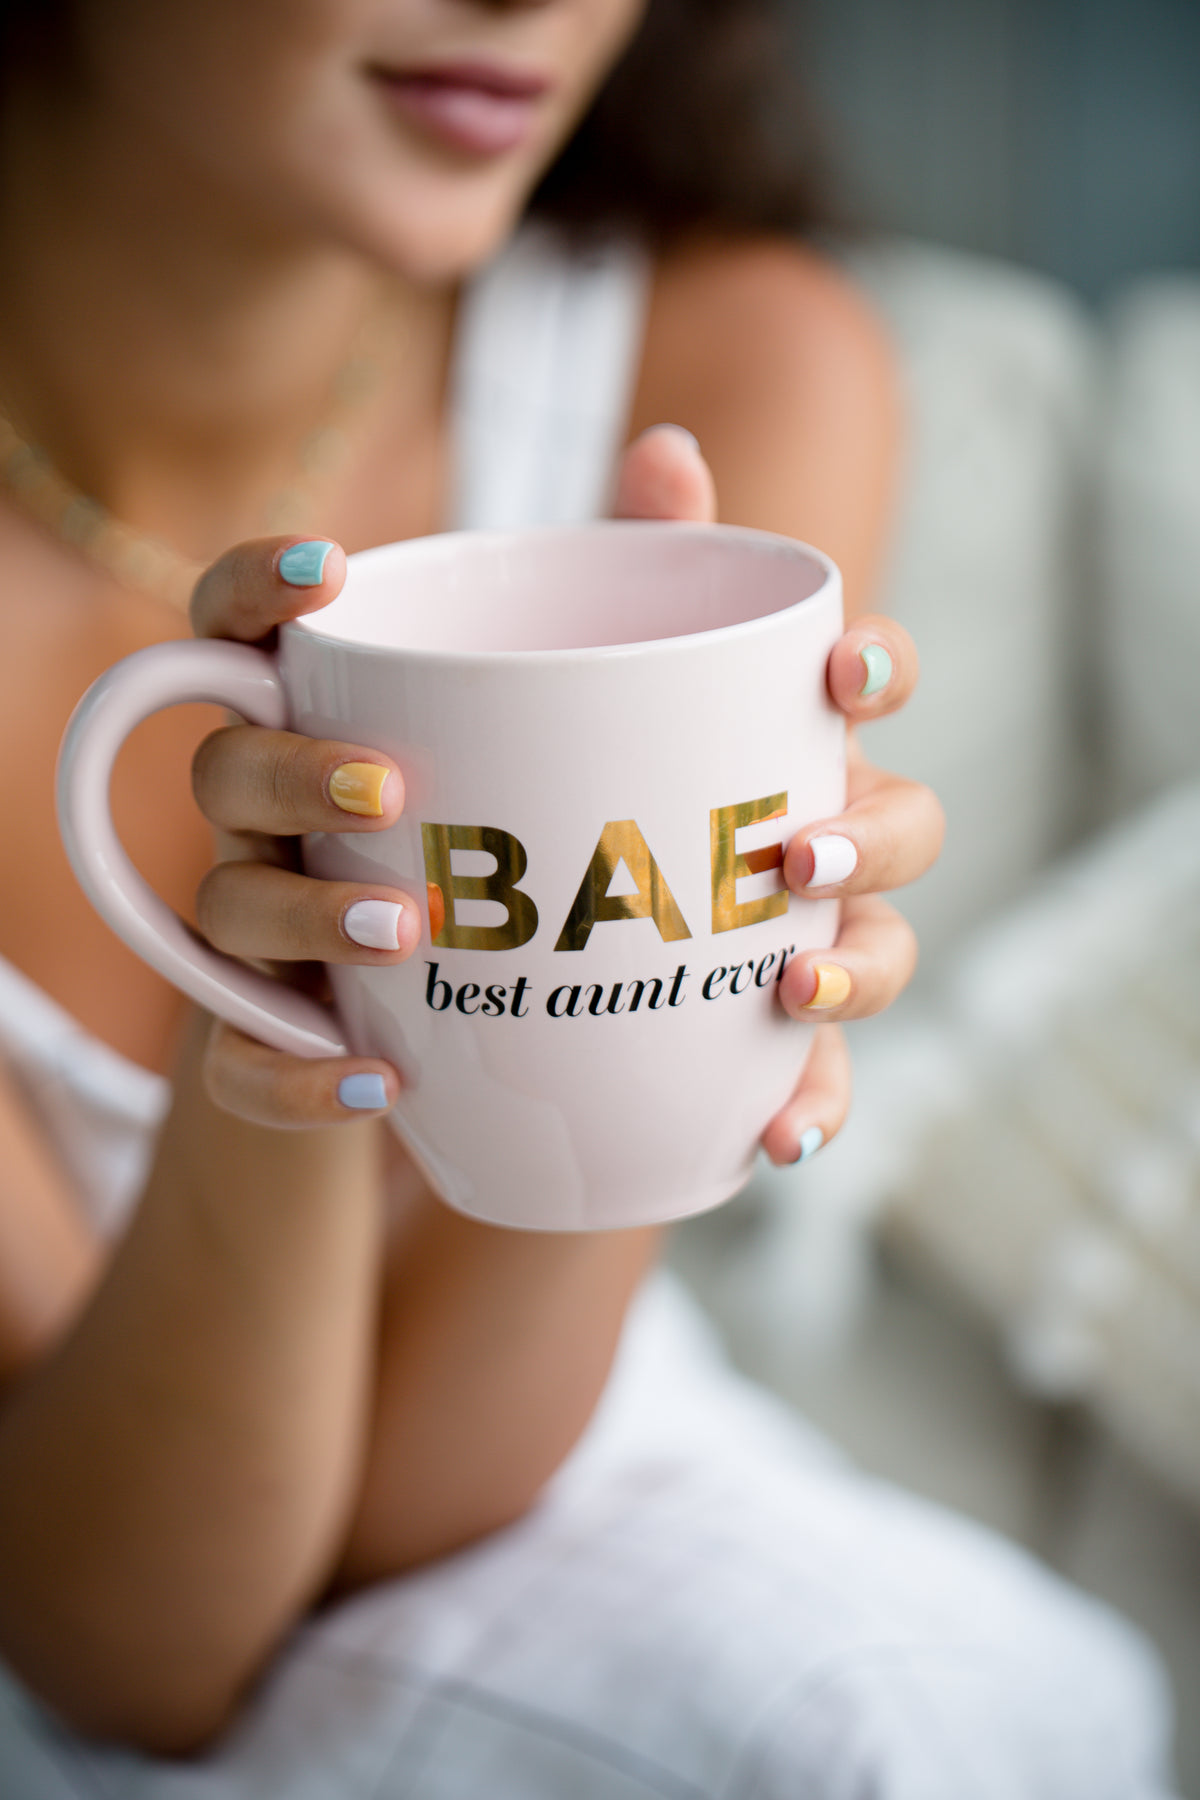 person holds out a mug that says best aunt ever